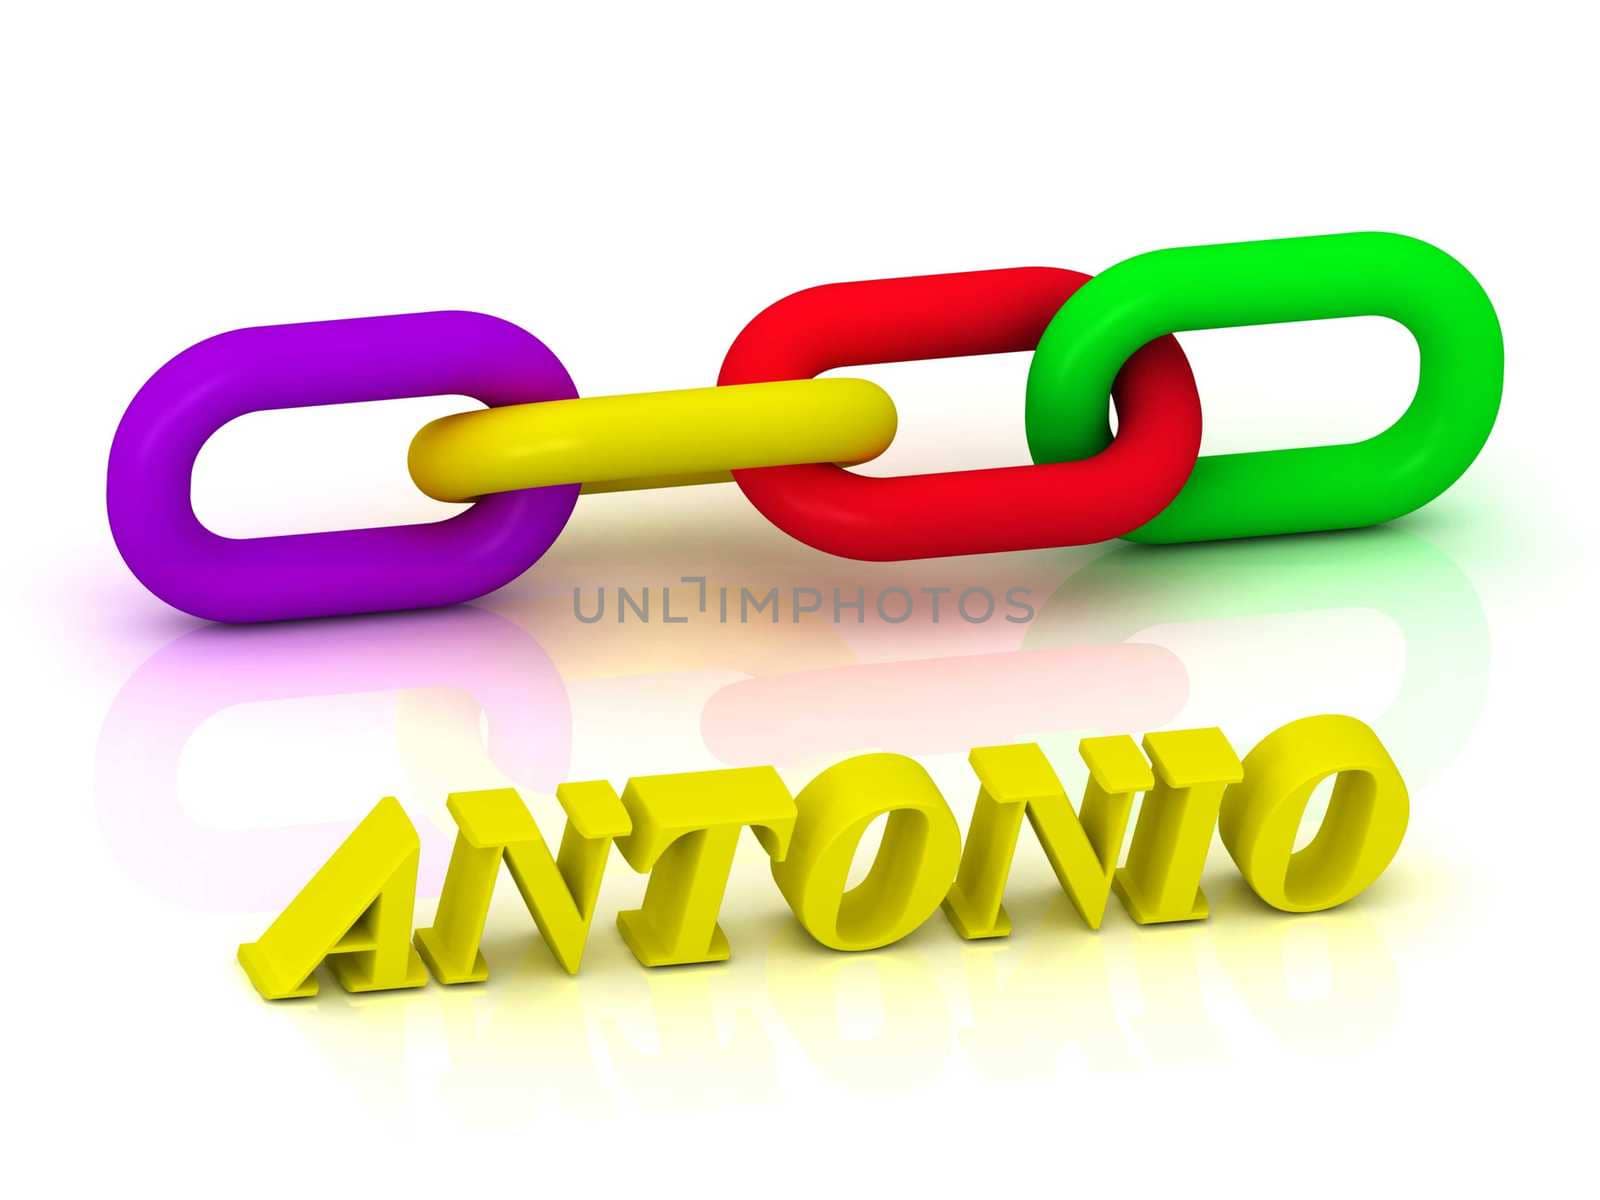 ANTONIO- Name and Family of bright yellow letters and chain of green, yellow, red section on white background